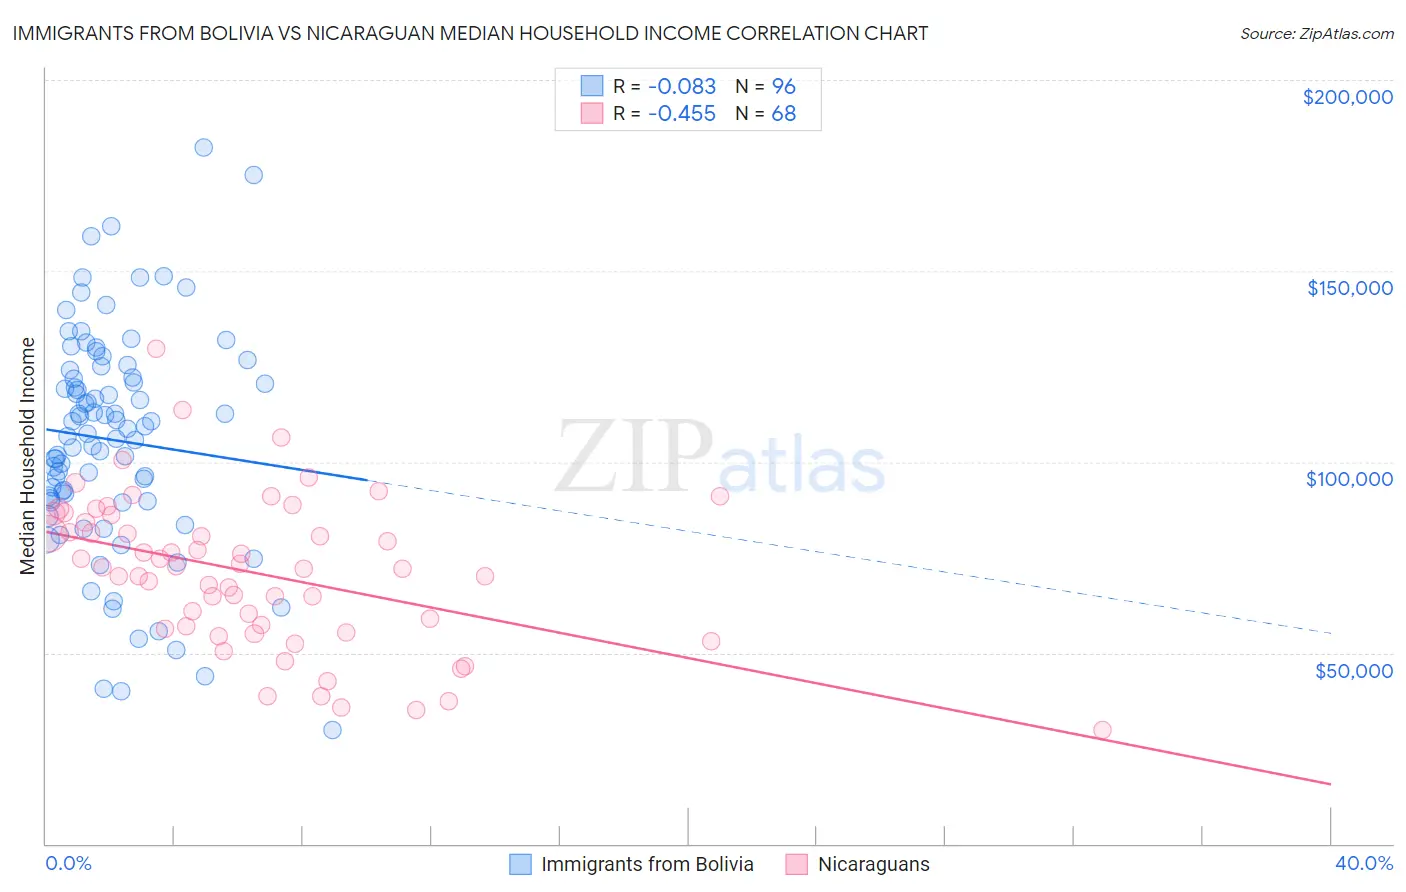 Immigrants from Bolivia vs Nicaraguan Median Household Income